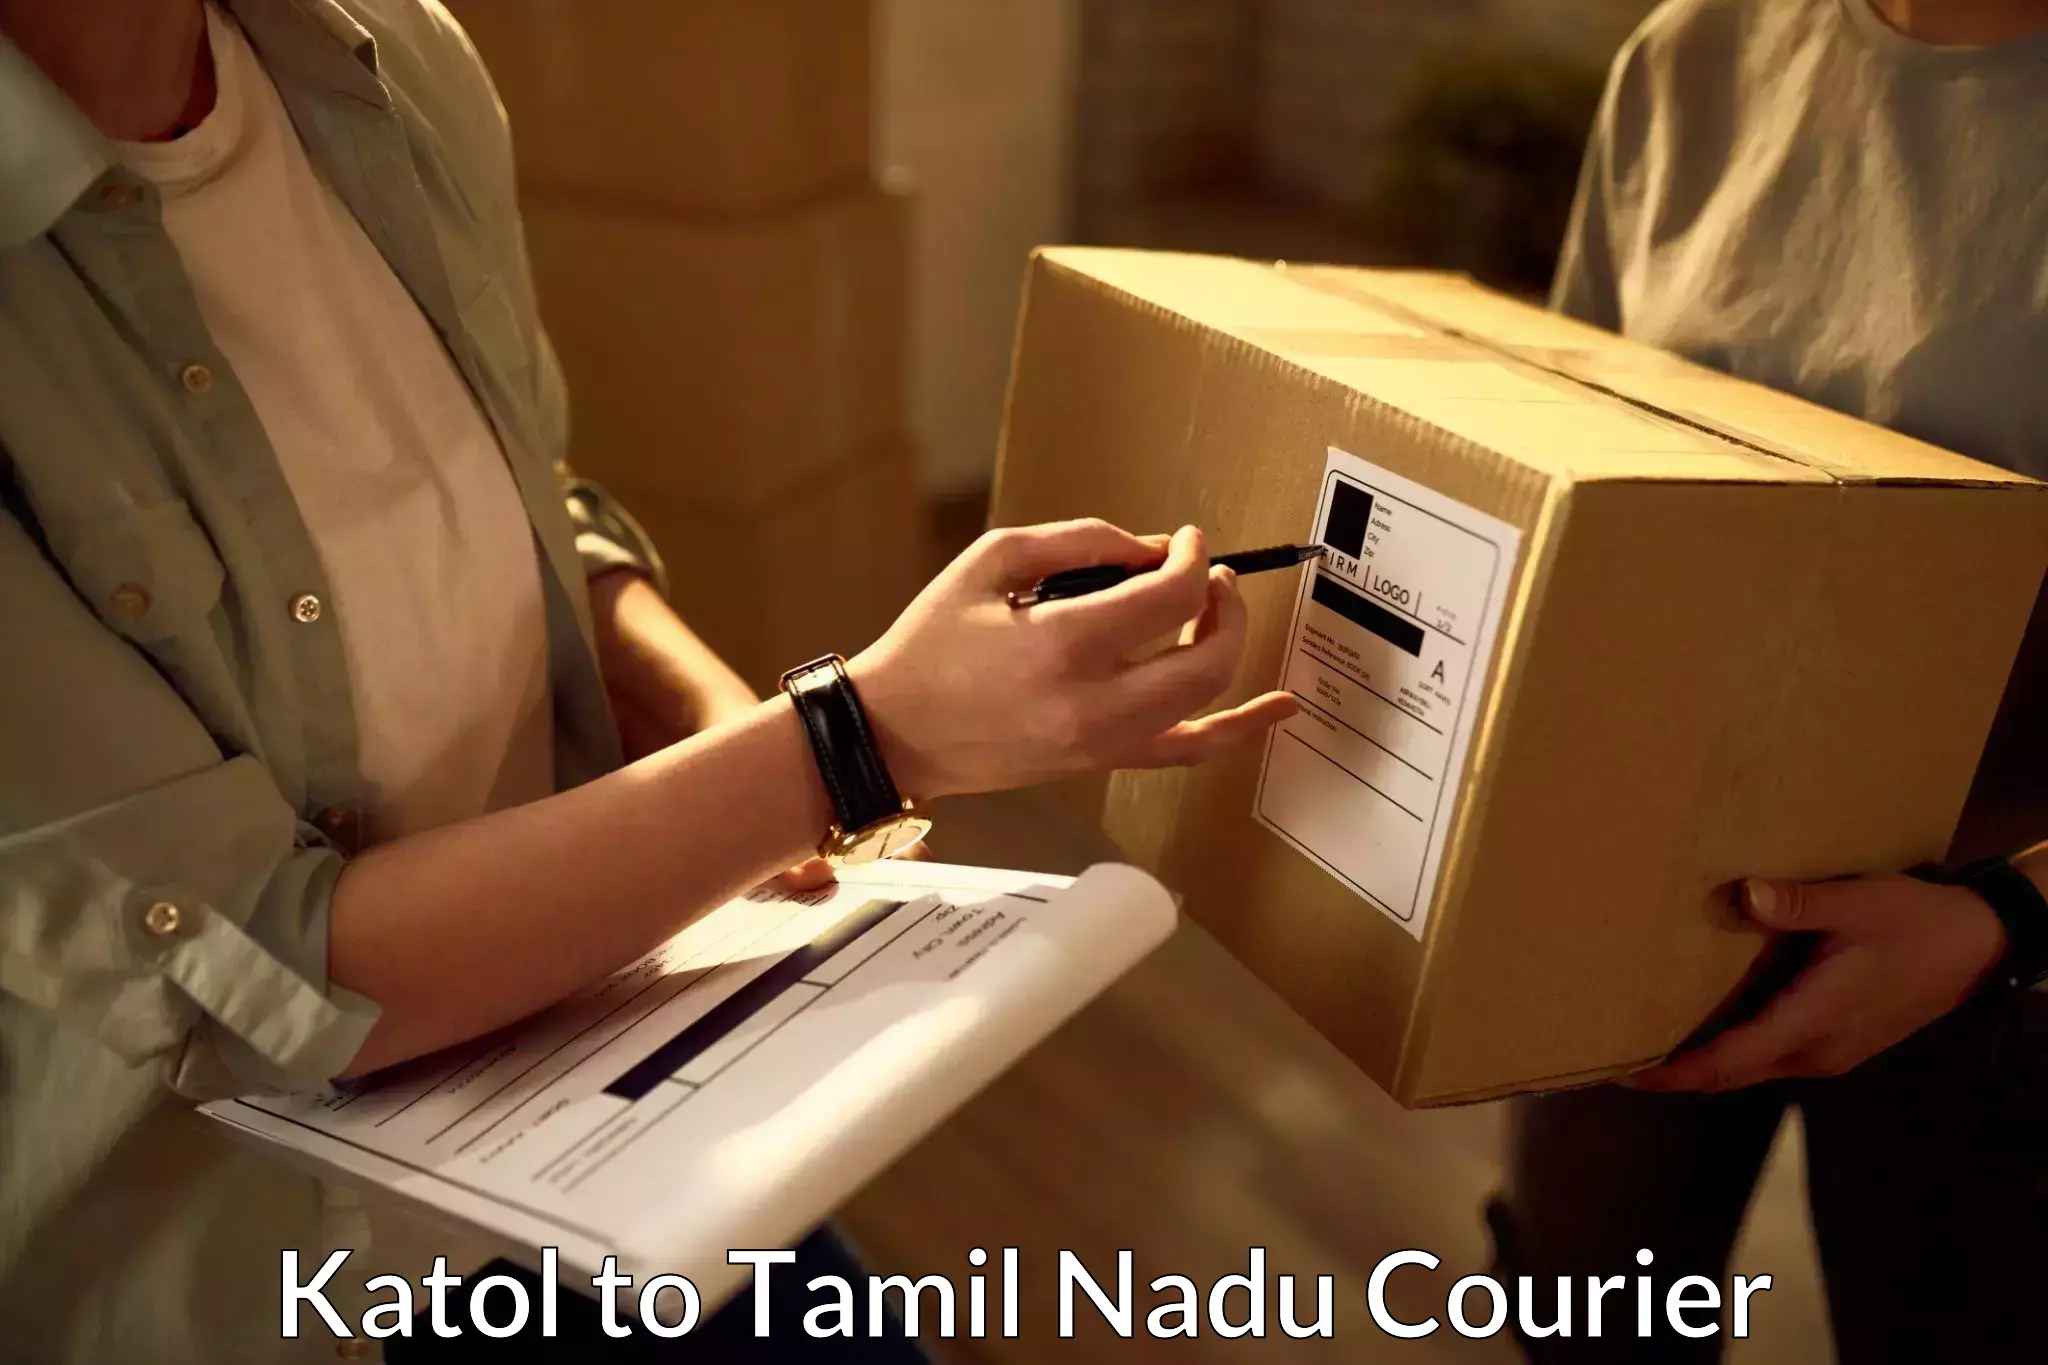 Reliable delivery network Katol to Rajapalayam